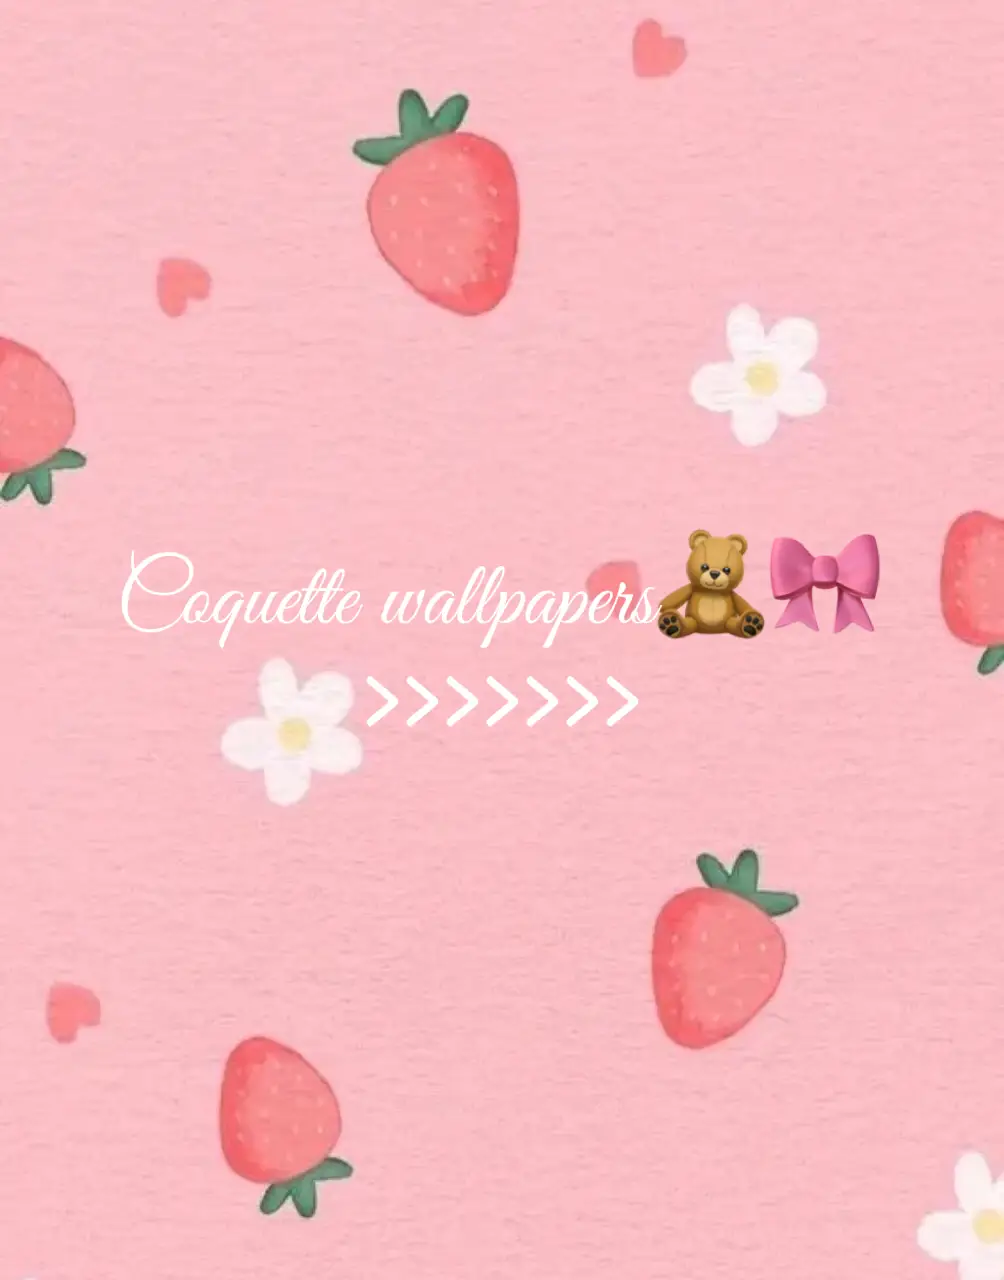 100+] Coquette Wallpapers